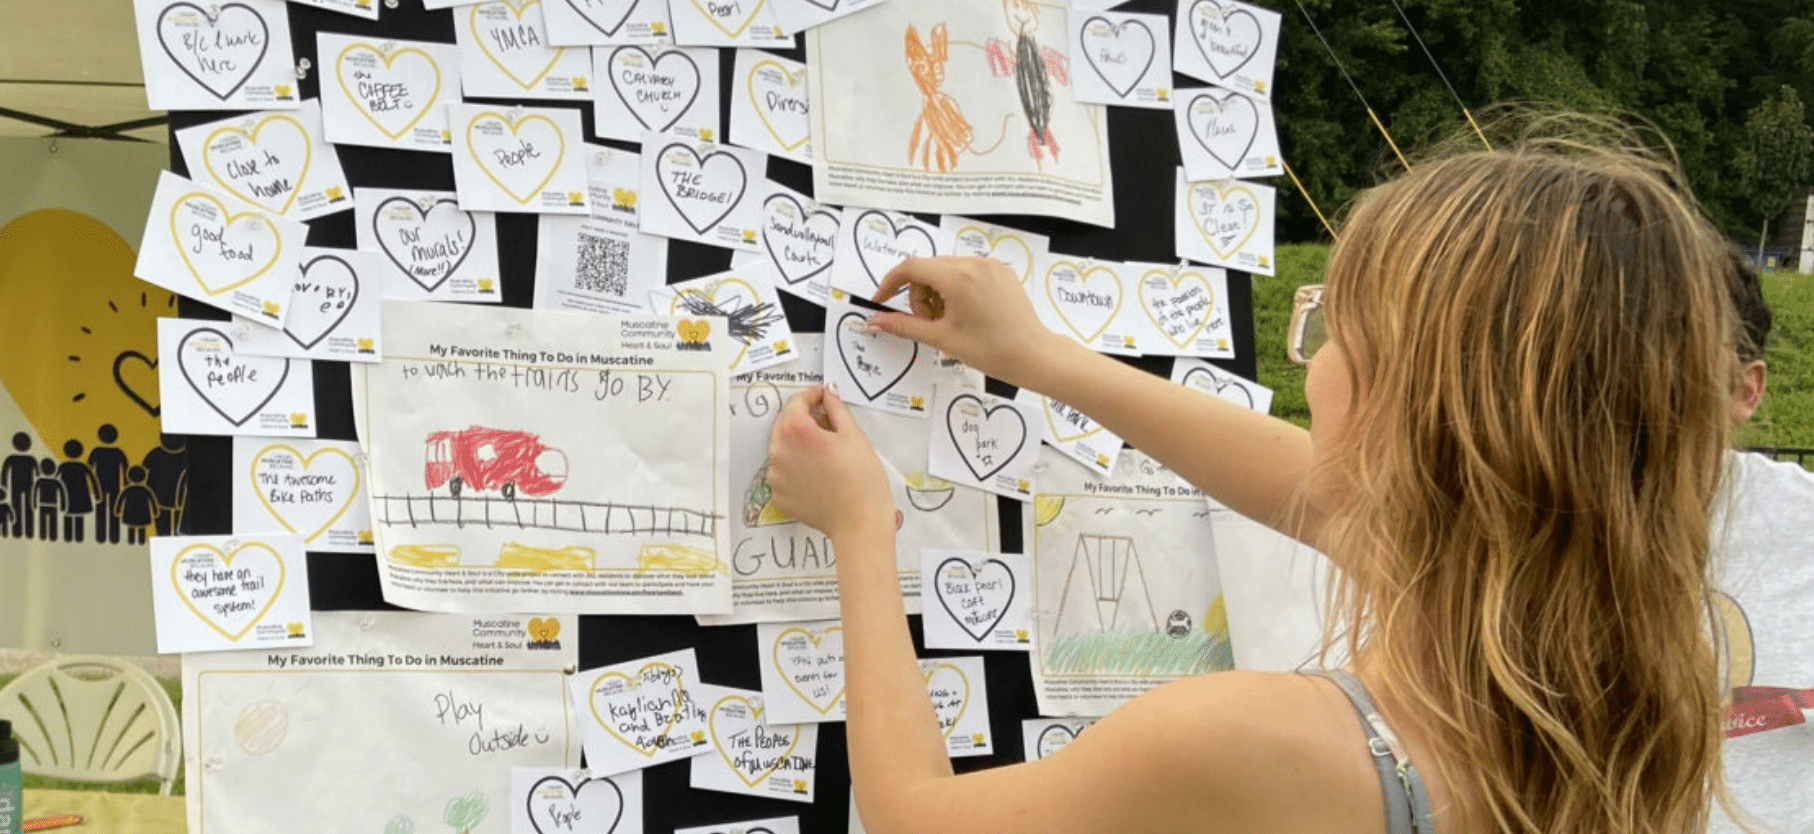 Grade-school age child putting up encouraging notes outside on bulletin board